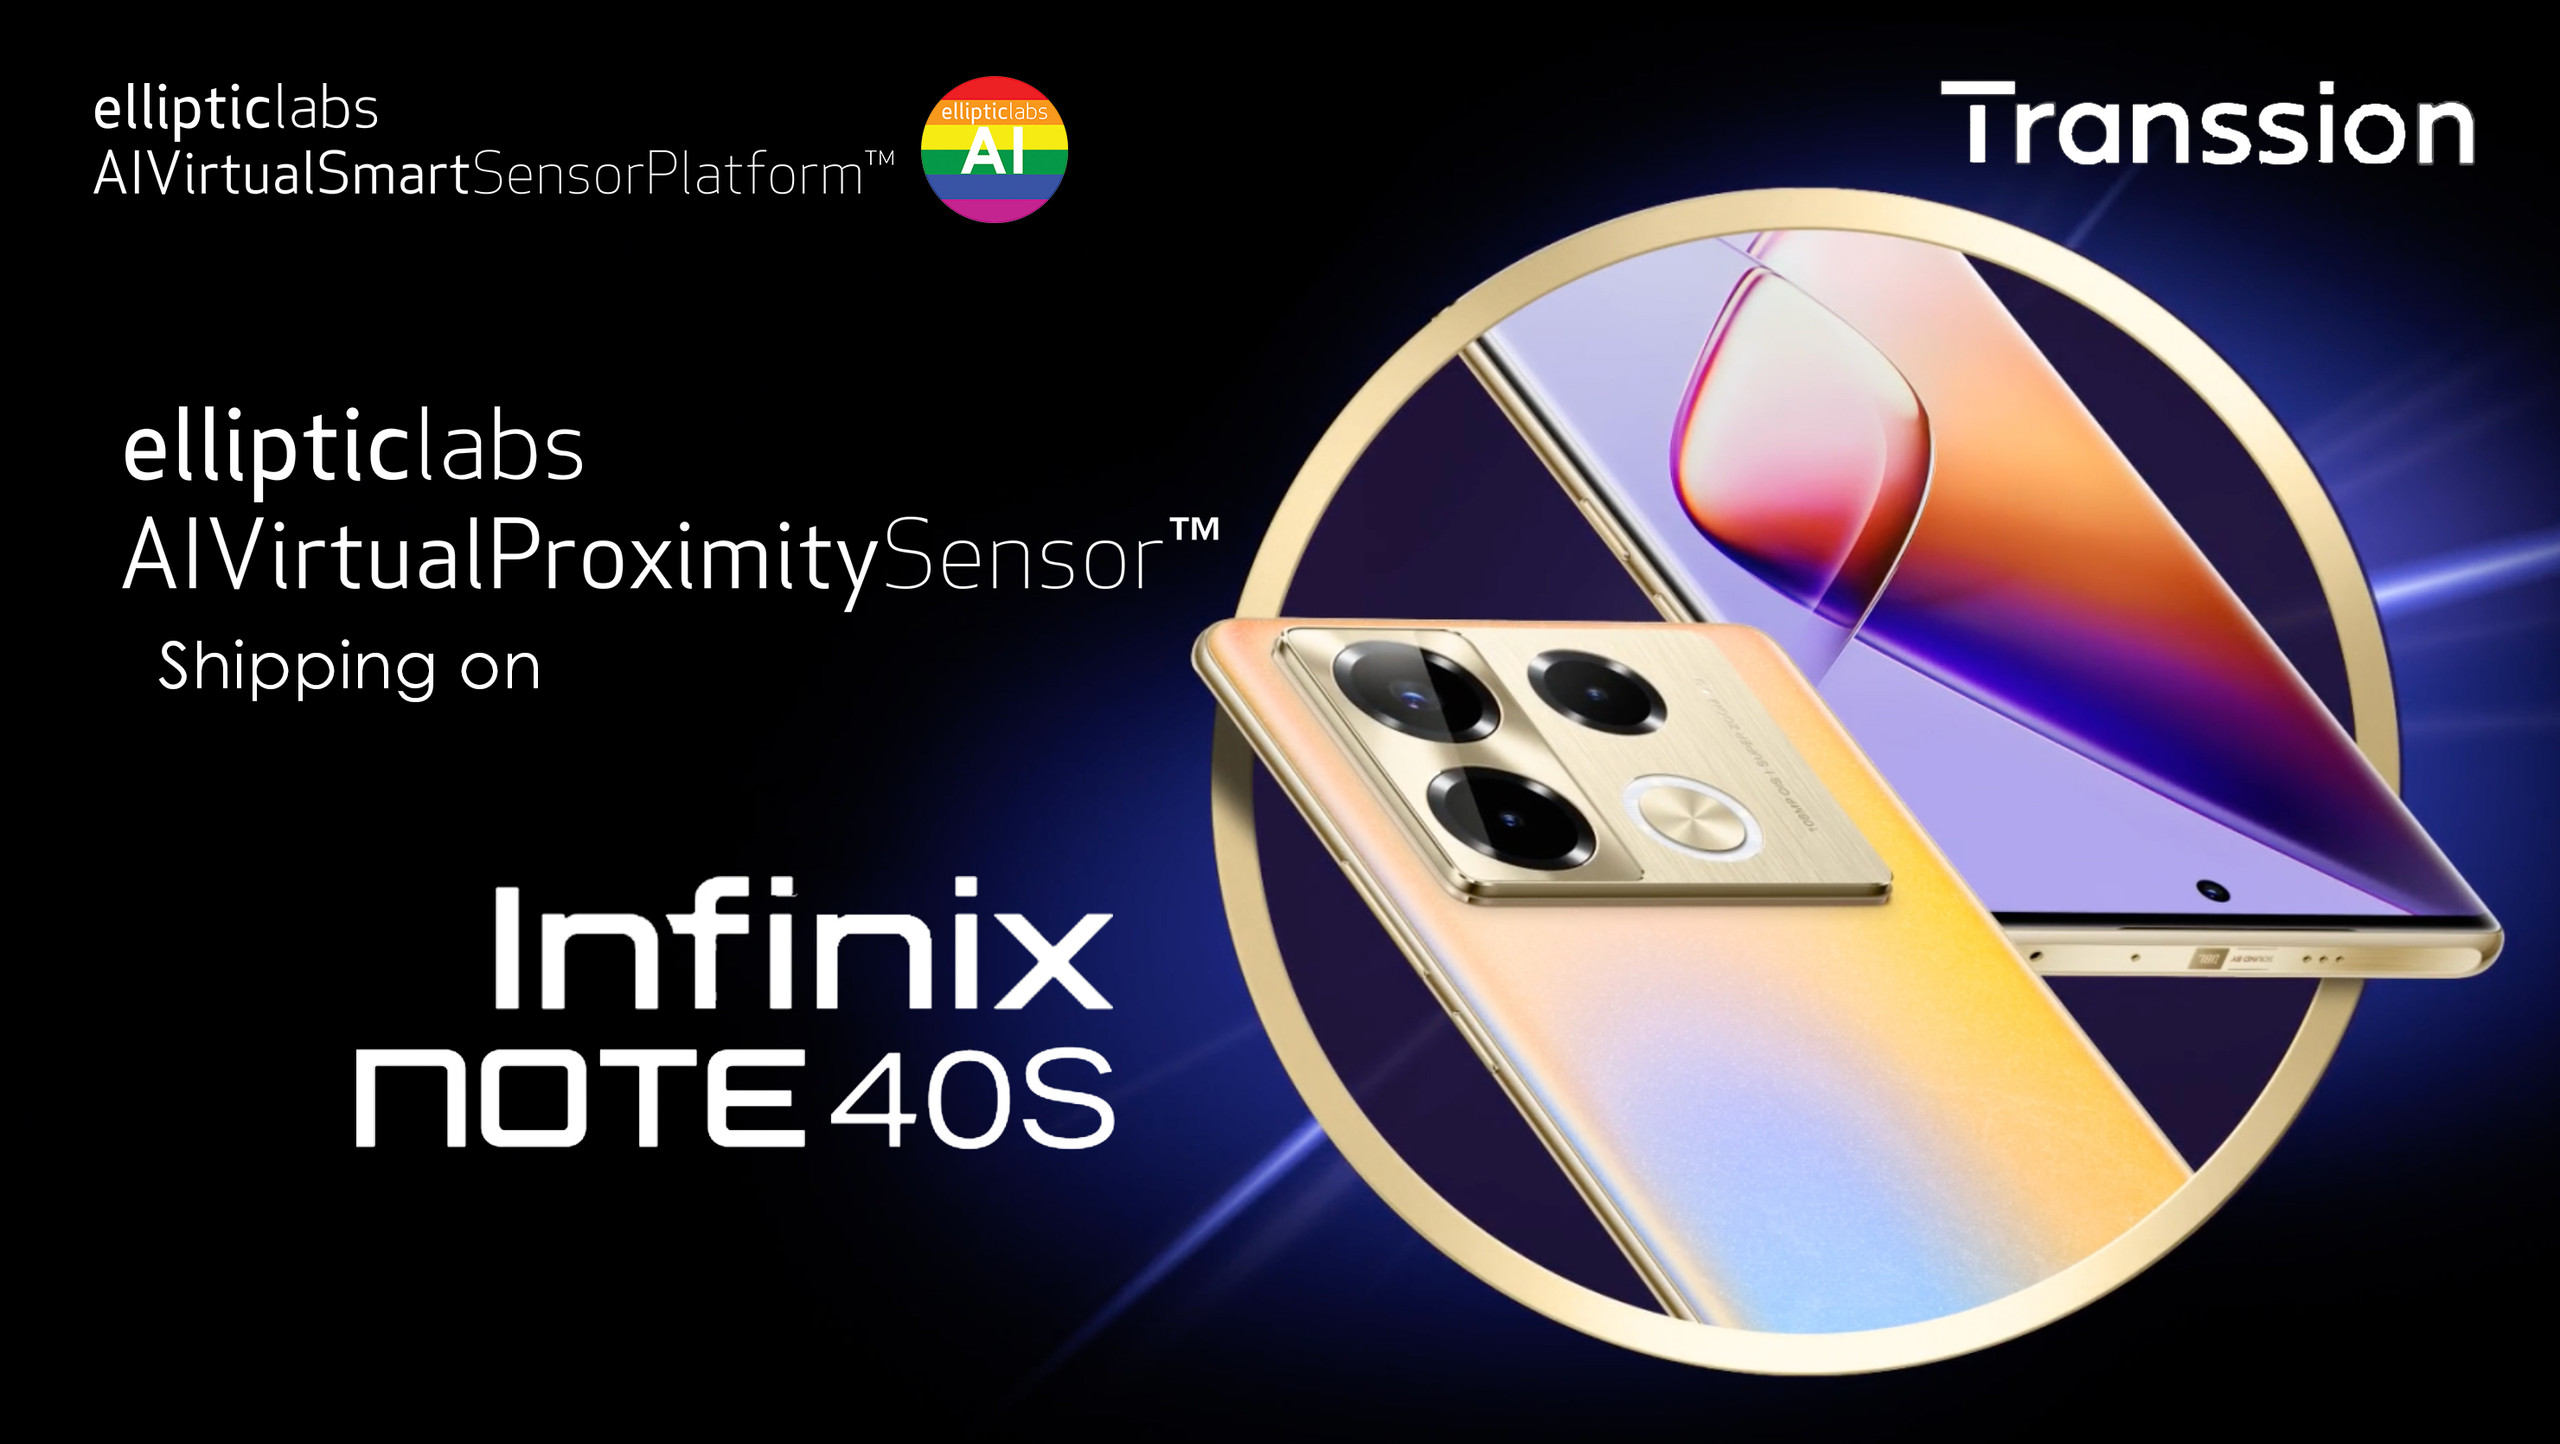 Elliptic Labs Launching on Transsion’s Infinix Note 40S Smartphone